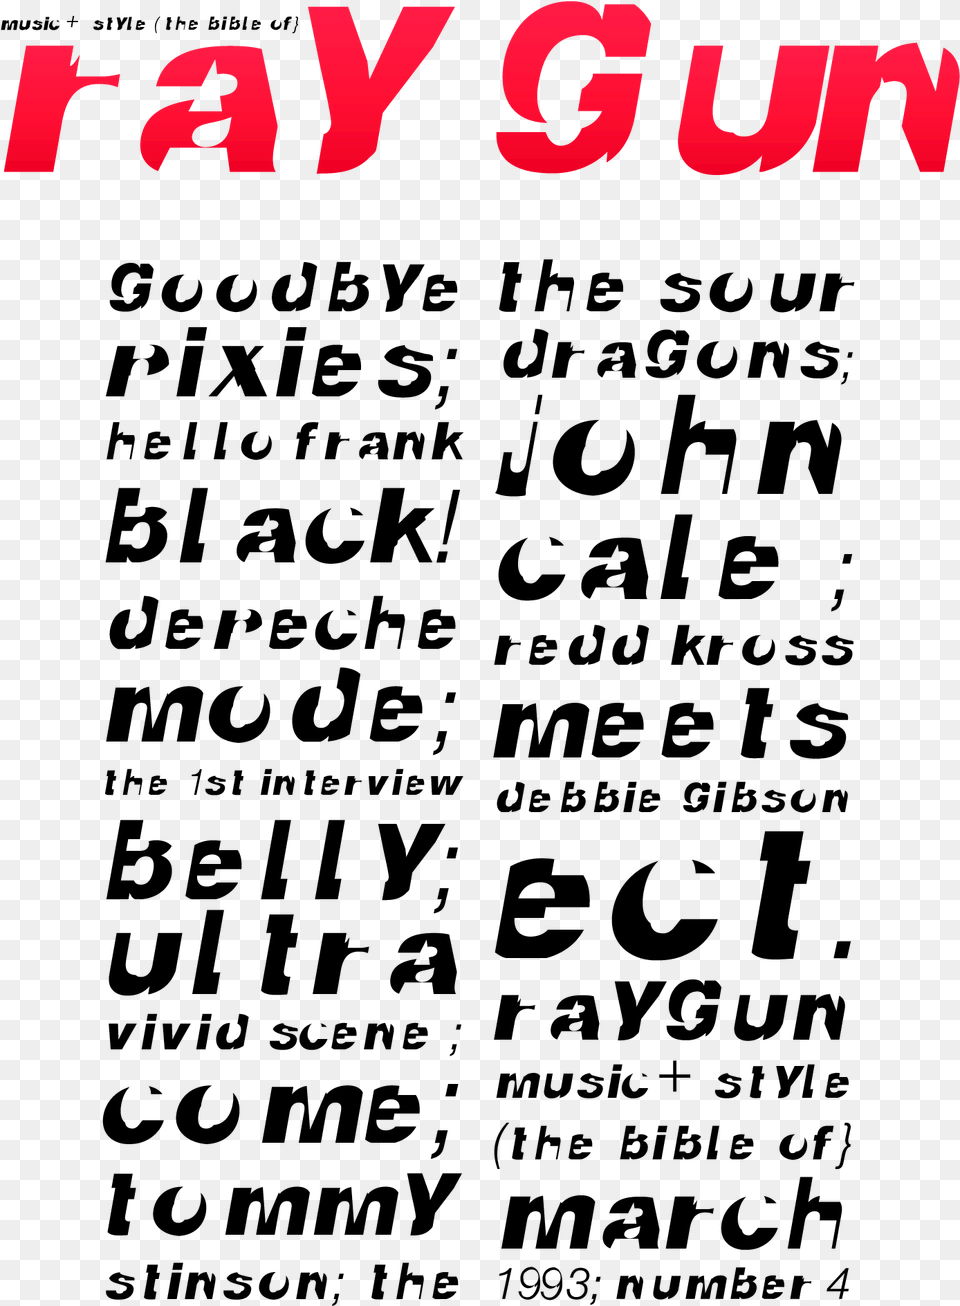 Huw Williams Typeface 2016 Based On David Carson Ray David Carson Typeface, Text Free Png Download